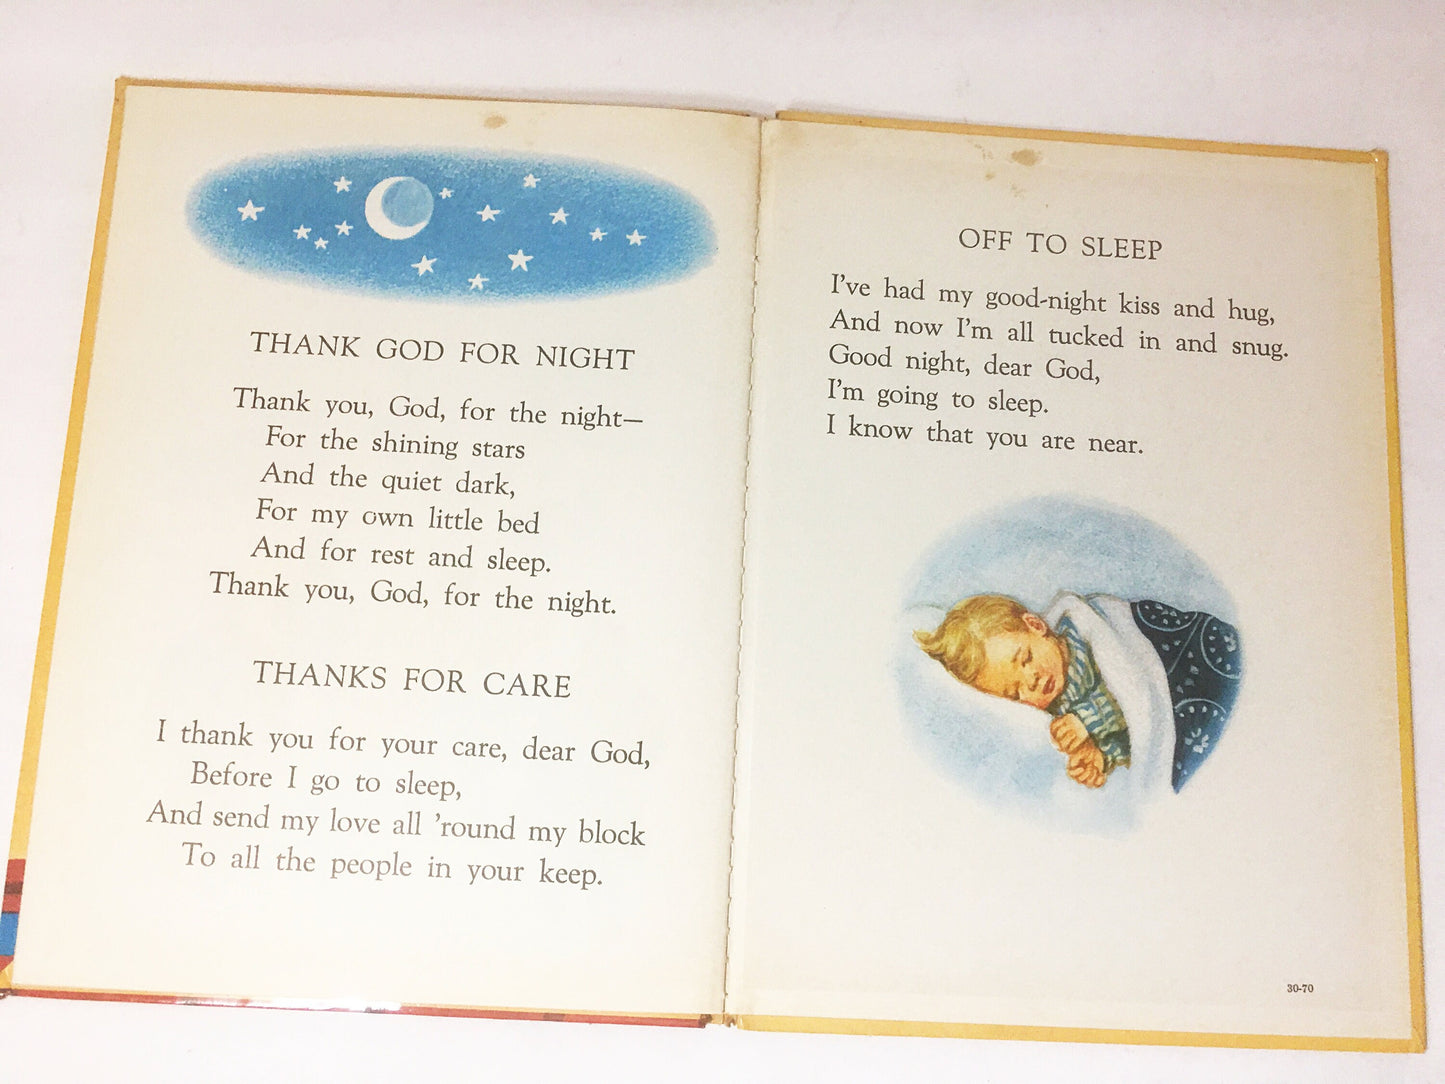 Prayers and Graces for a Small Child vintage Big Golden Book with Whimsical Illustrations circa 1959 Christian VG Condition